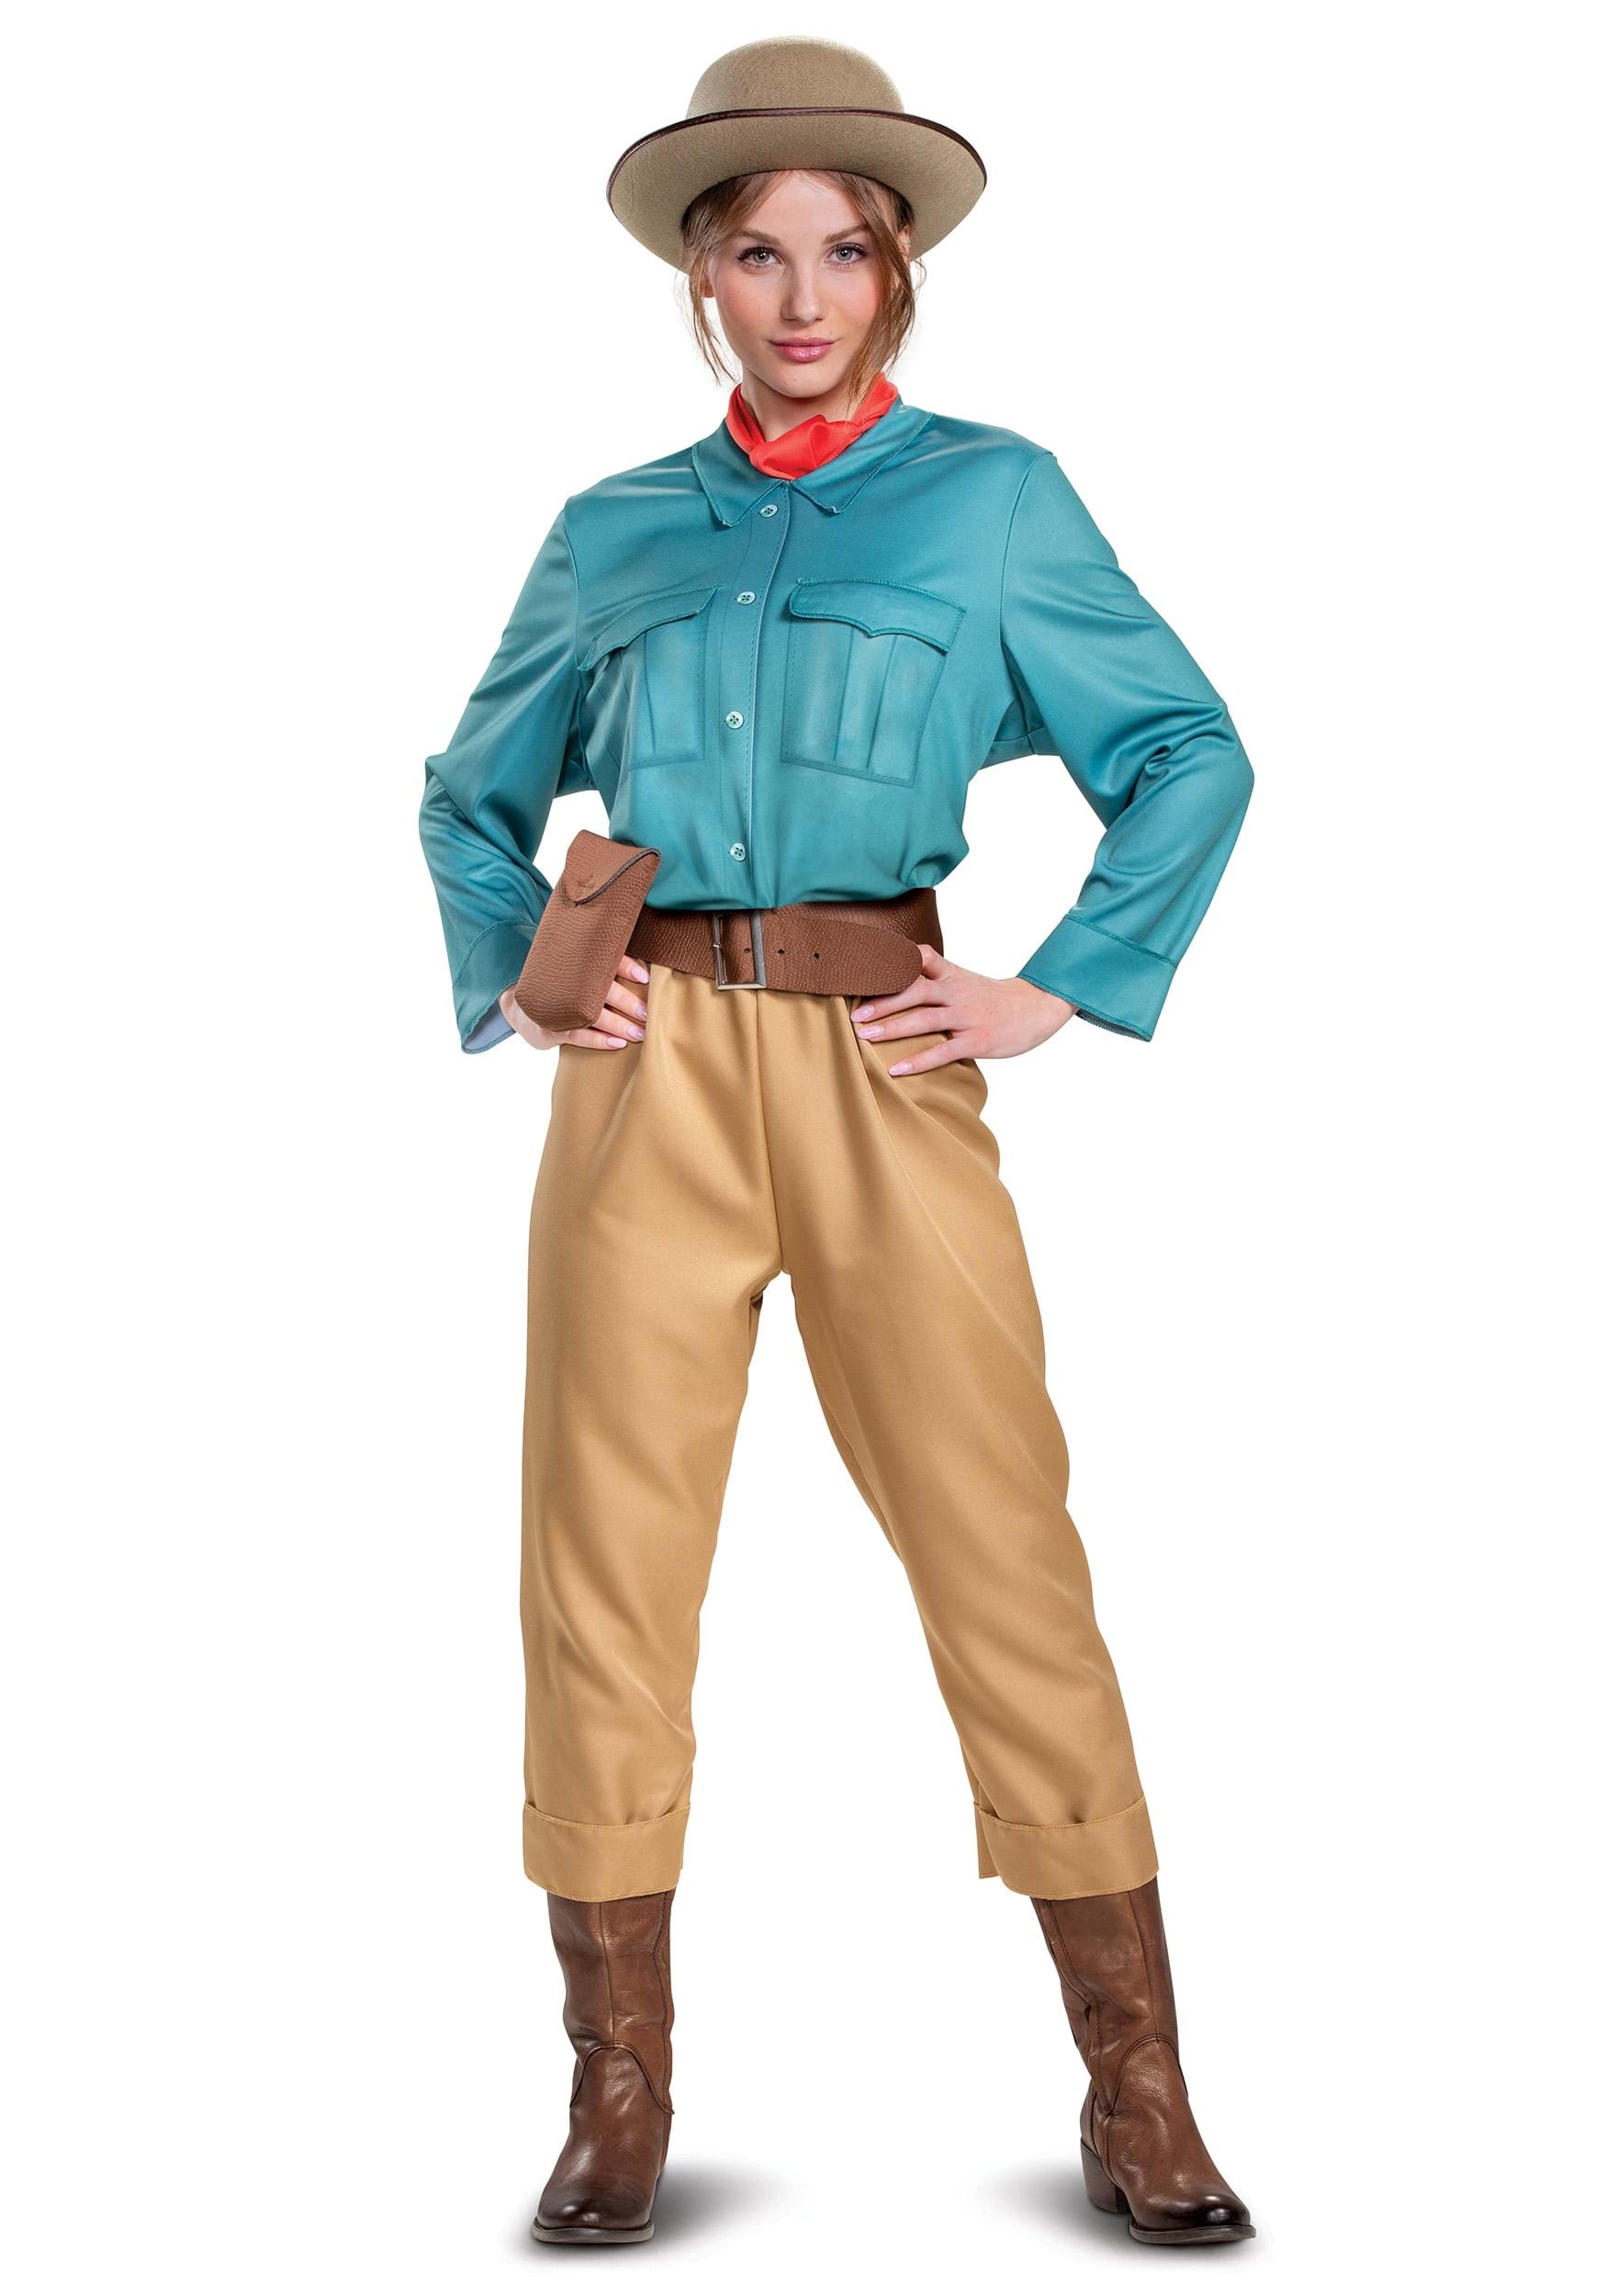 Women's Jungle Cruise Deluxe Lily Fancy Dress Costume